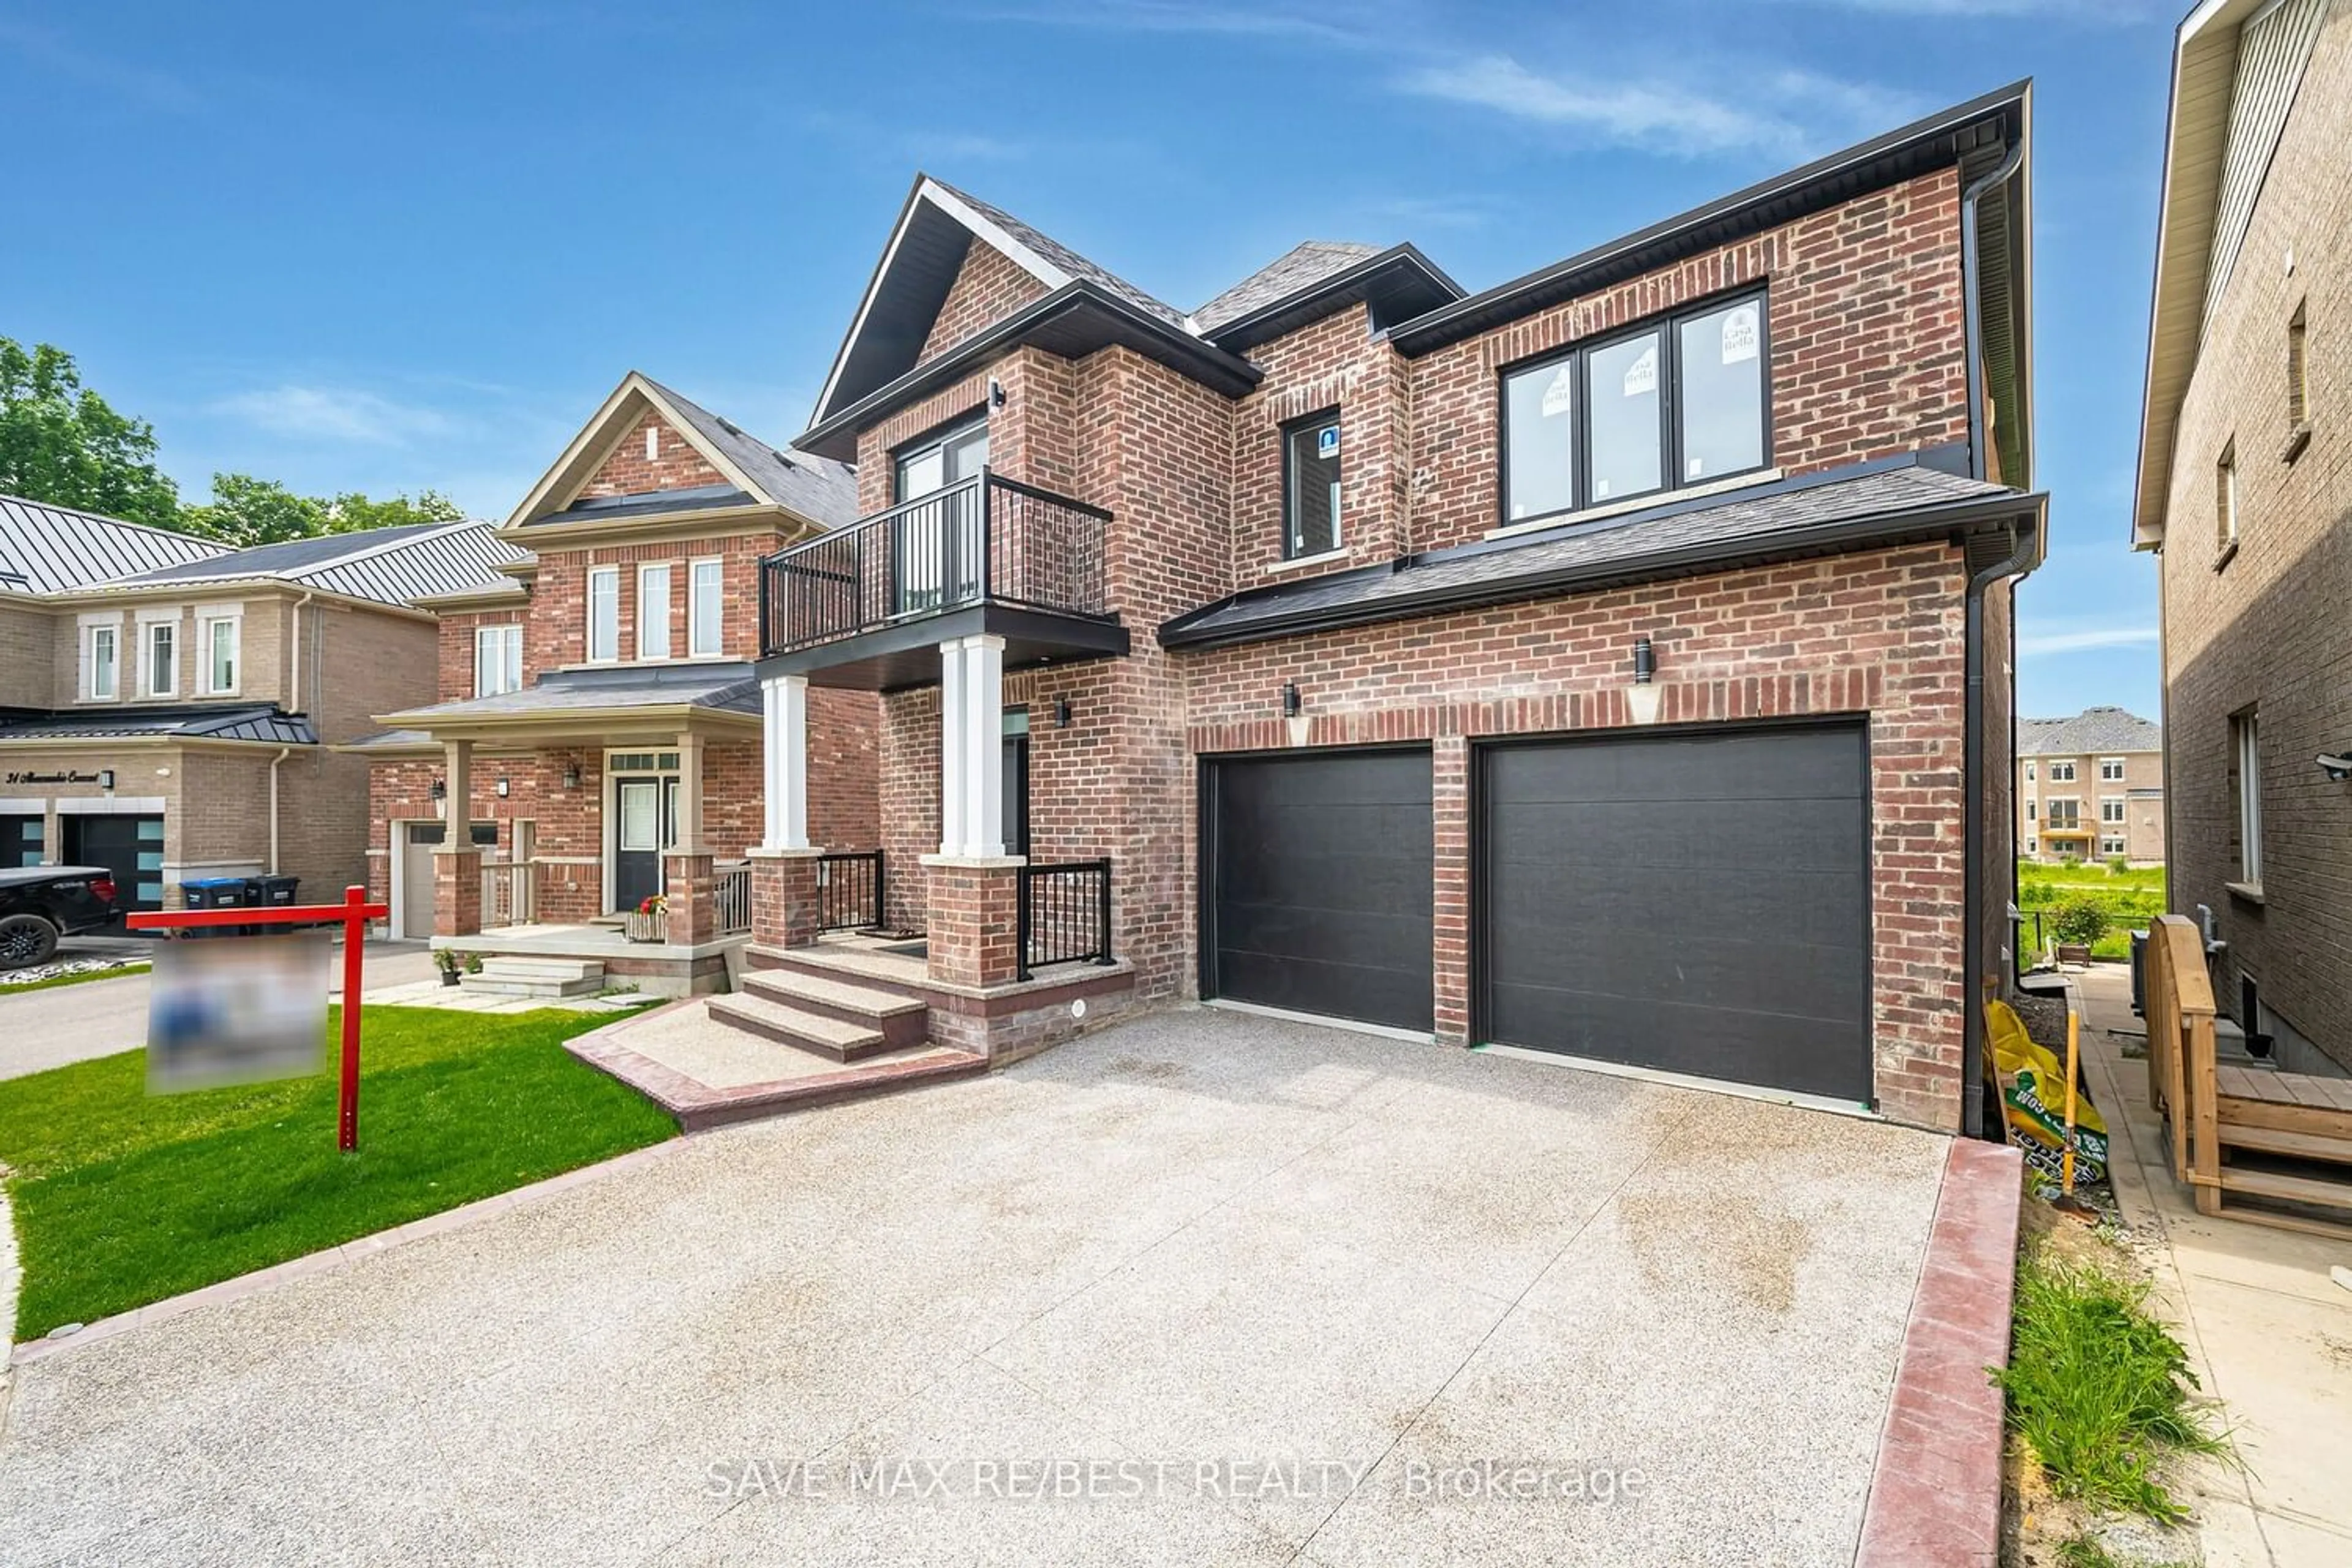 Home with brick exterior material for 30 Abercrombie Cres, Brampton Ontario L7A 4N1